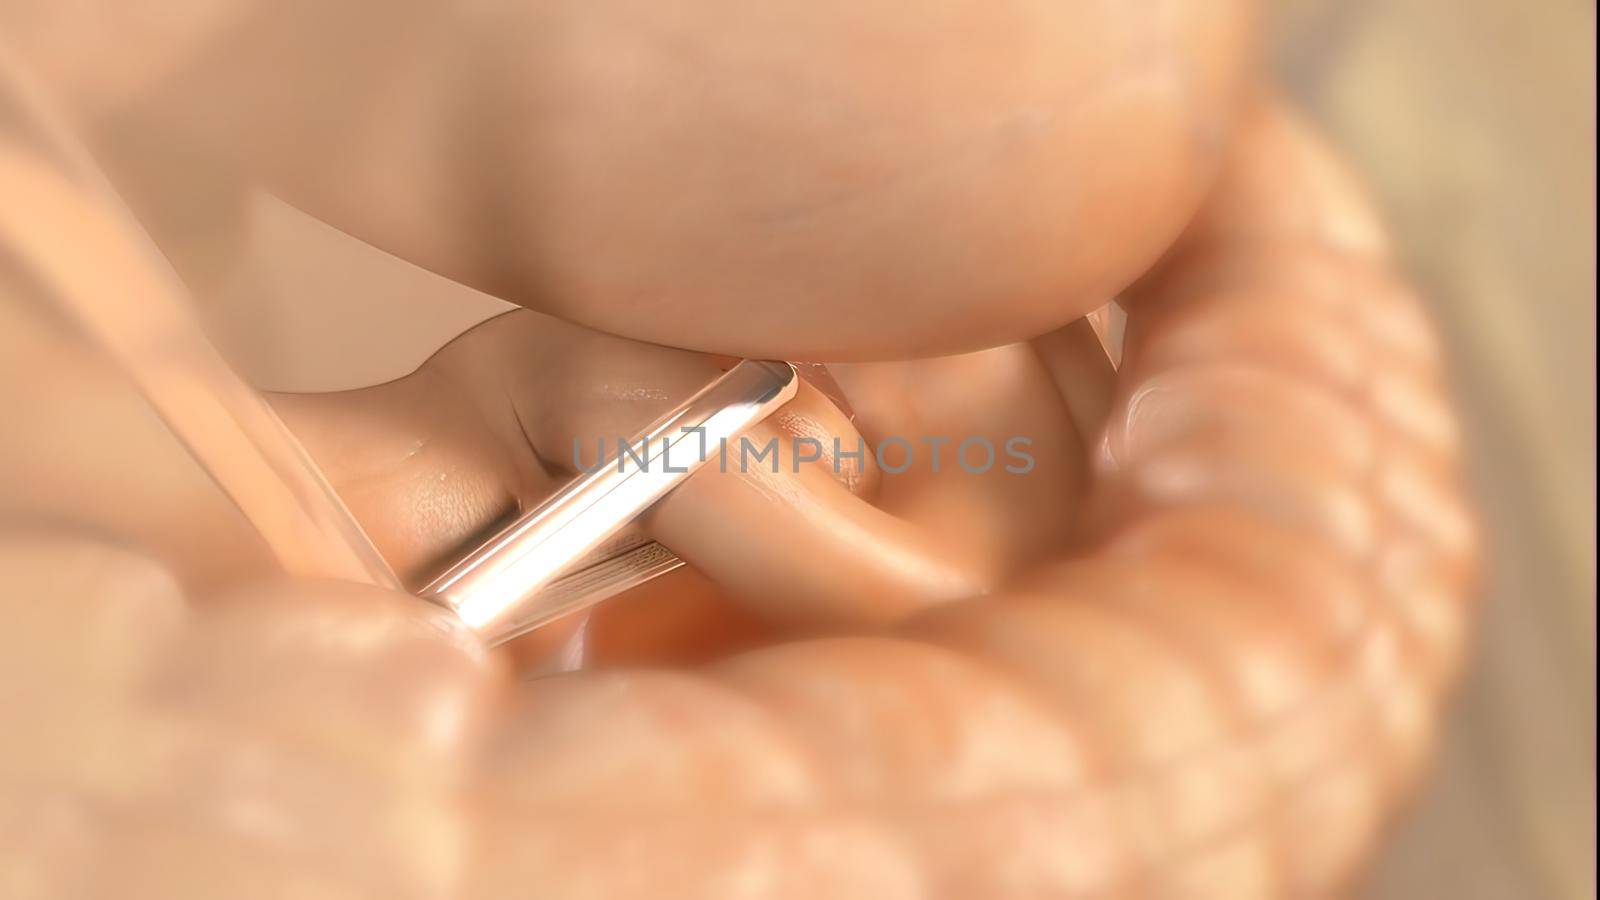 Realistic 3D Medical of Intestinal Workings by creativepic